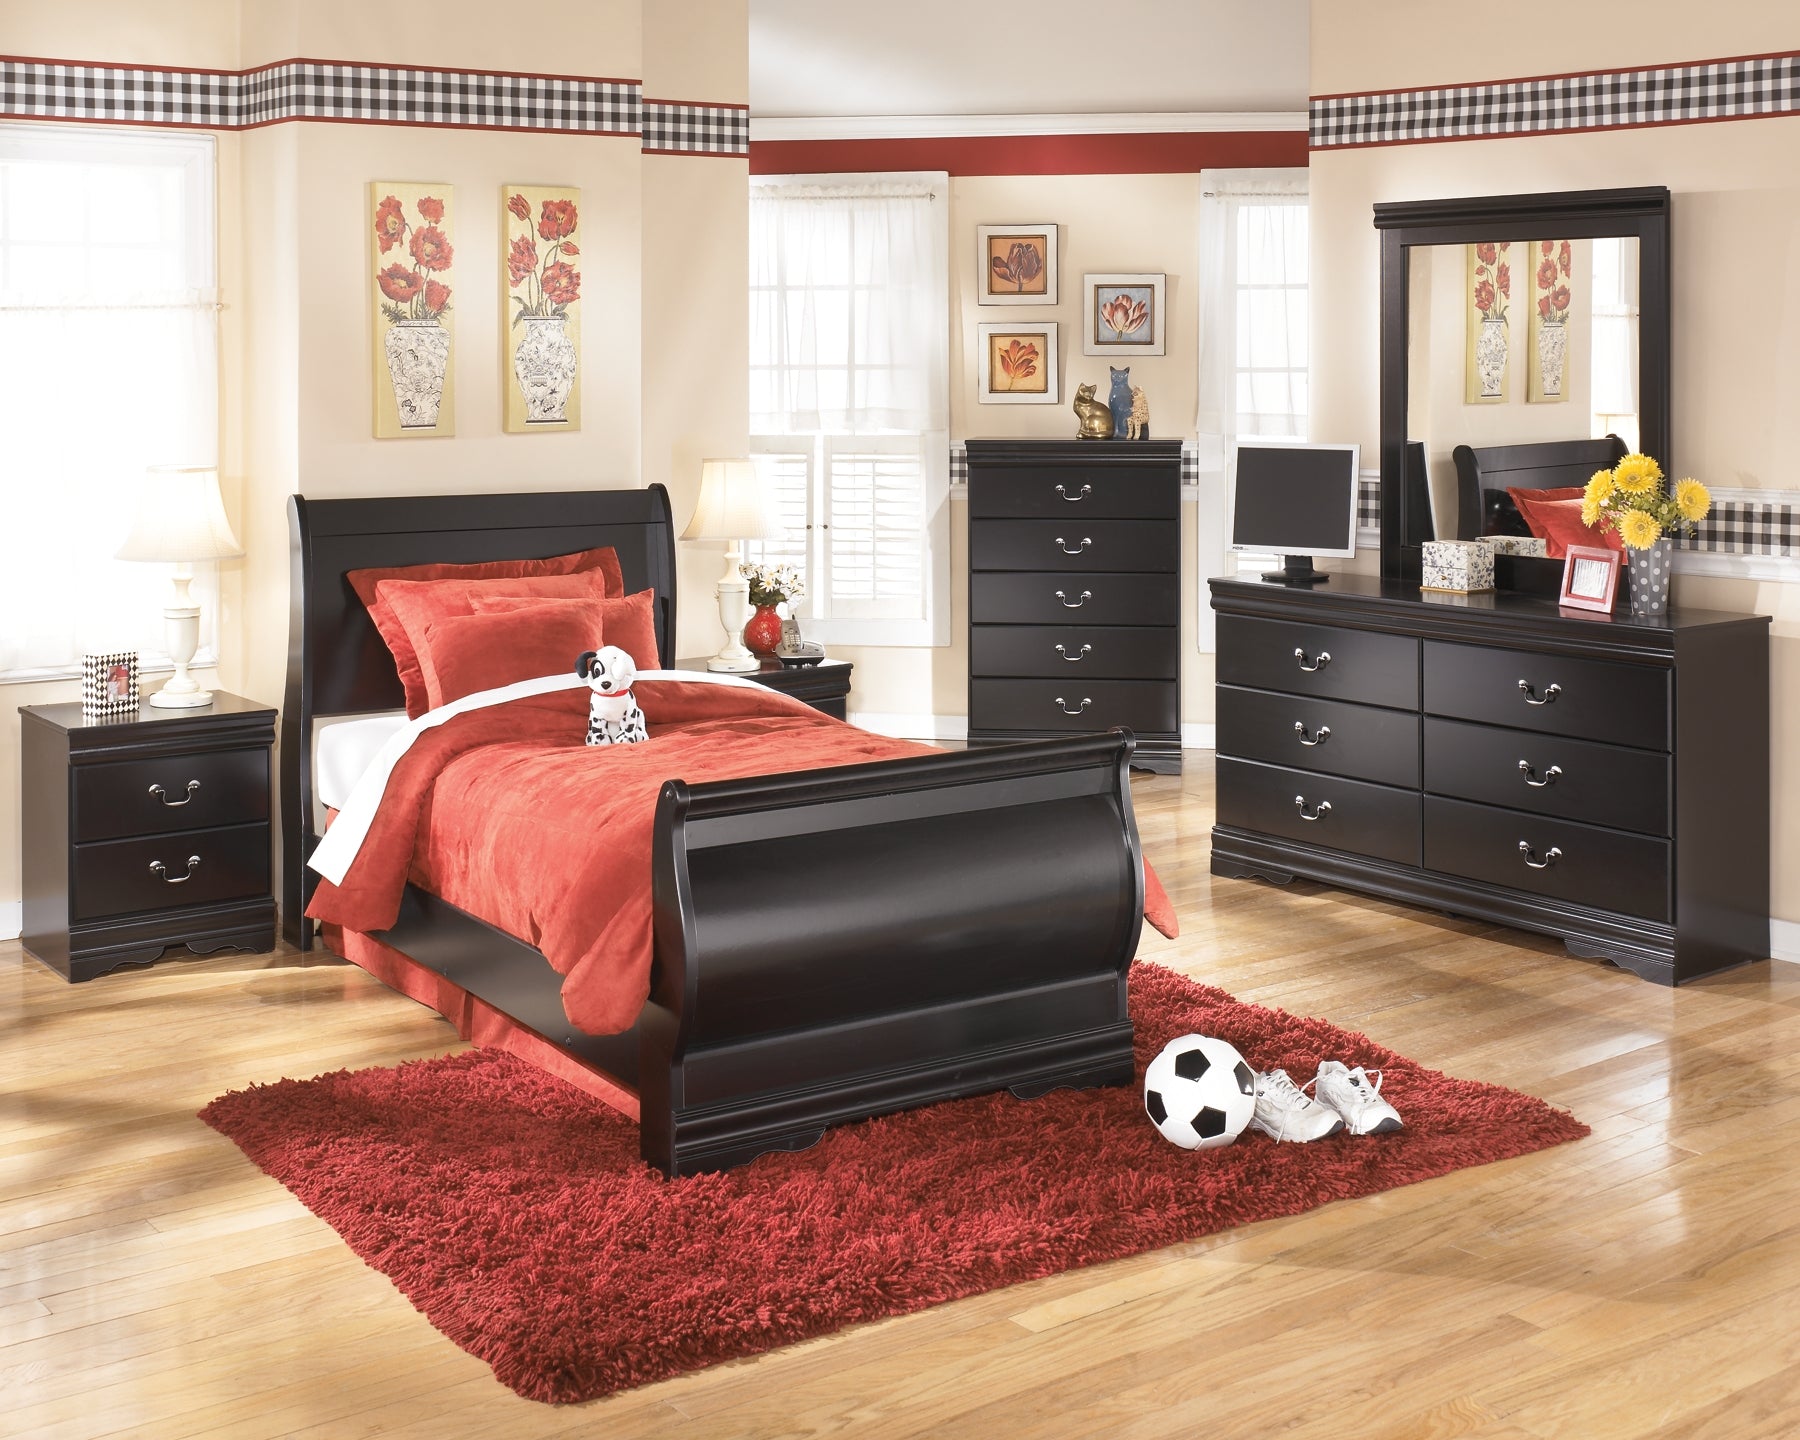 Huey Vineyard Full Sleigh Bed with Mirrored Dresser, Chest and Nightstand JB's Furniture  Home Furniture, Home Decor, Furniture Store